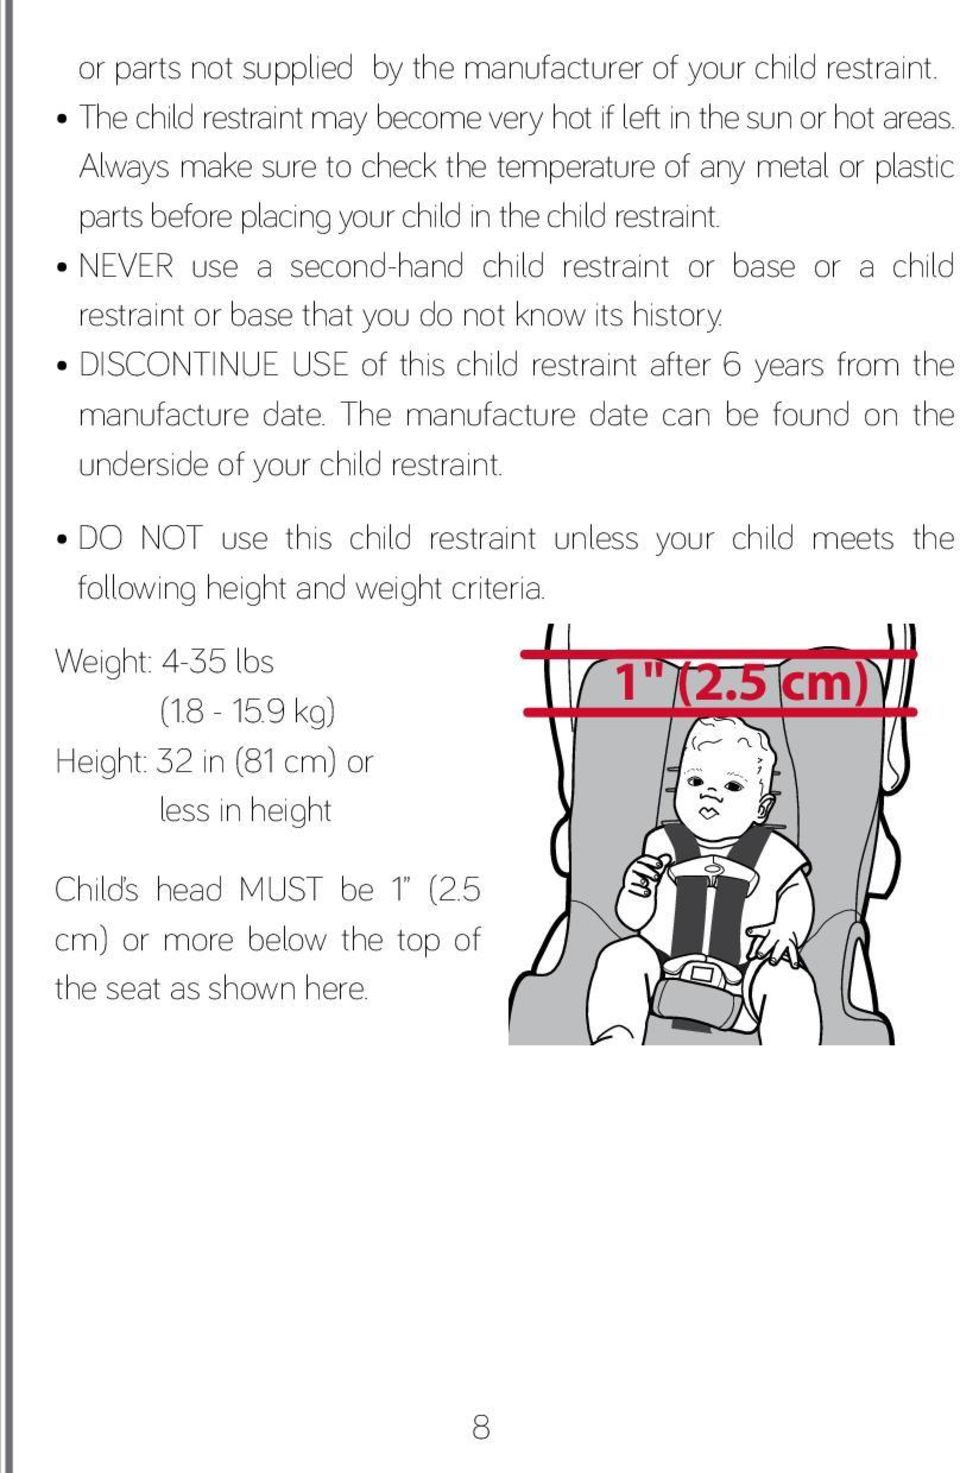 NEVER use a second-hand child restraint or base or a child restraint or base that you do not know its history. DISCONTINUE USE of this child restraint after 6 years from the manufacture date.